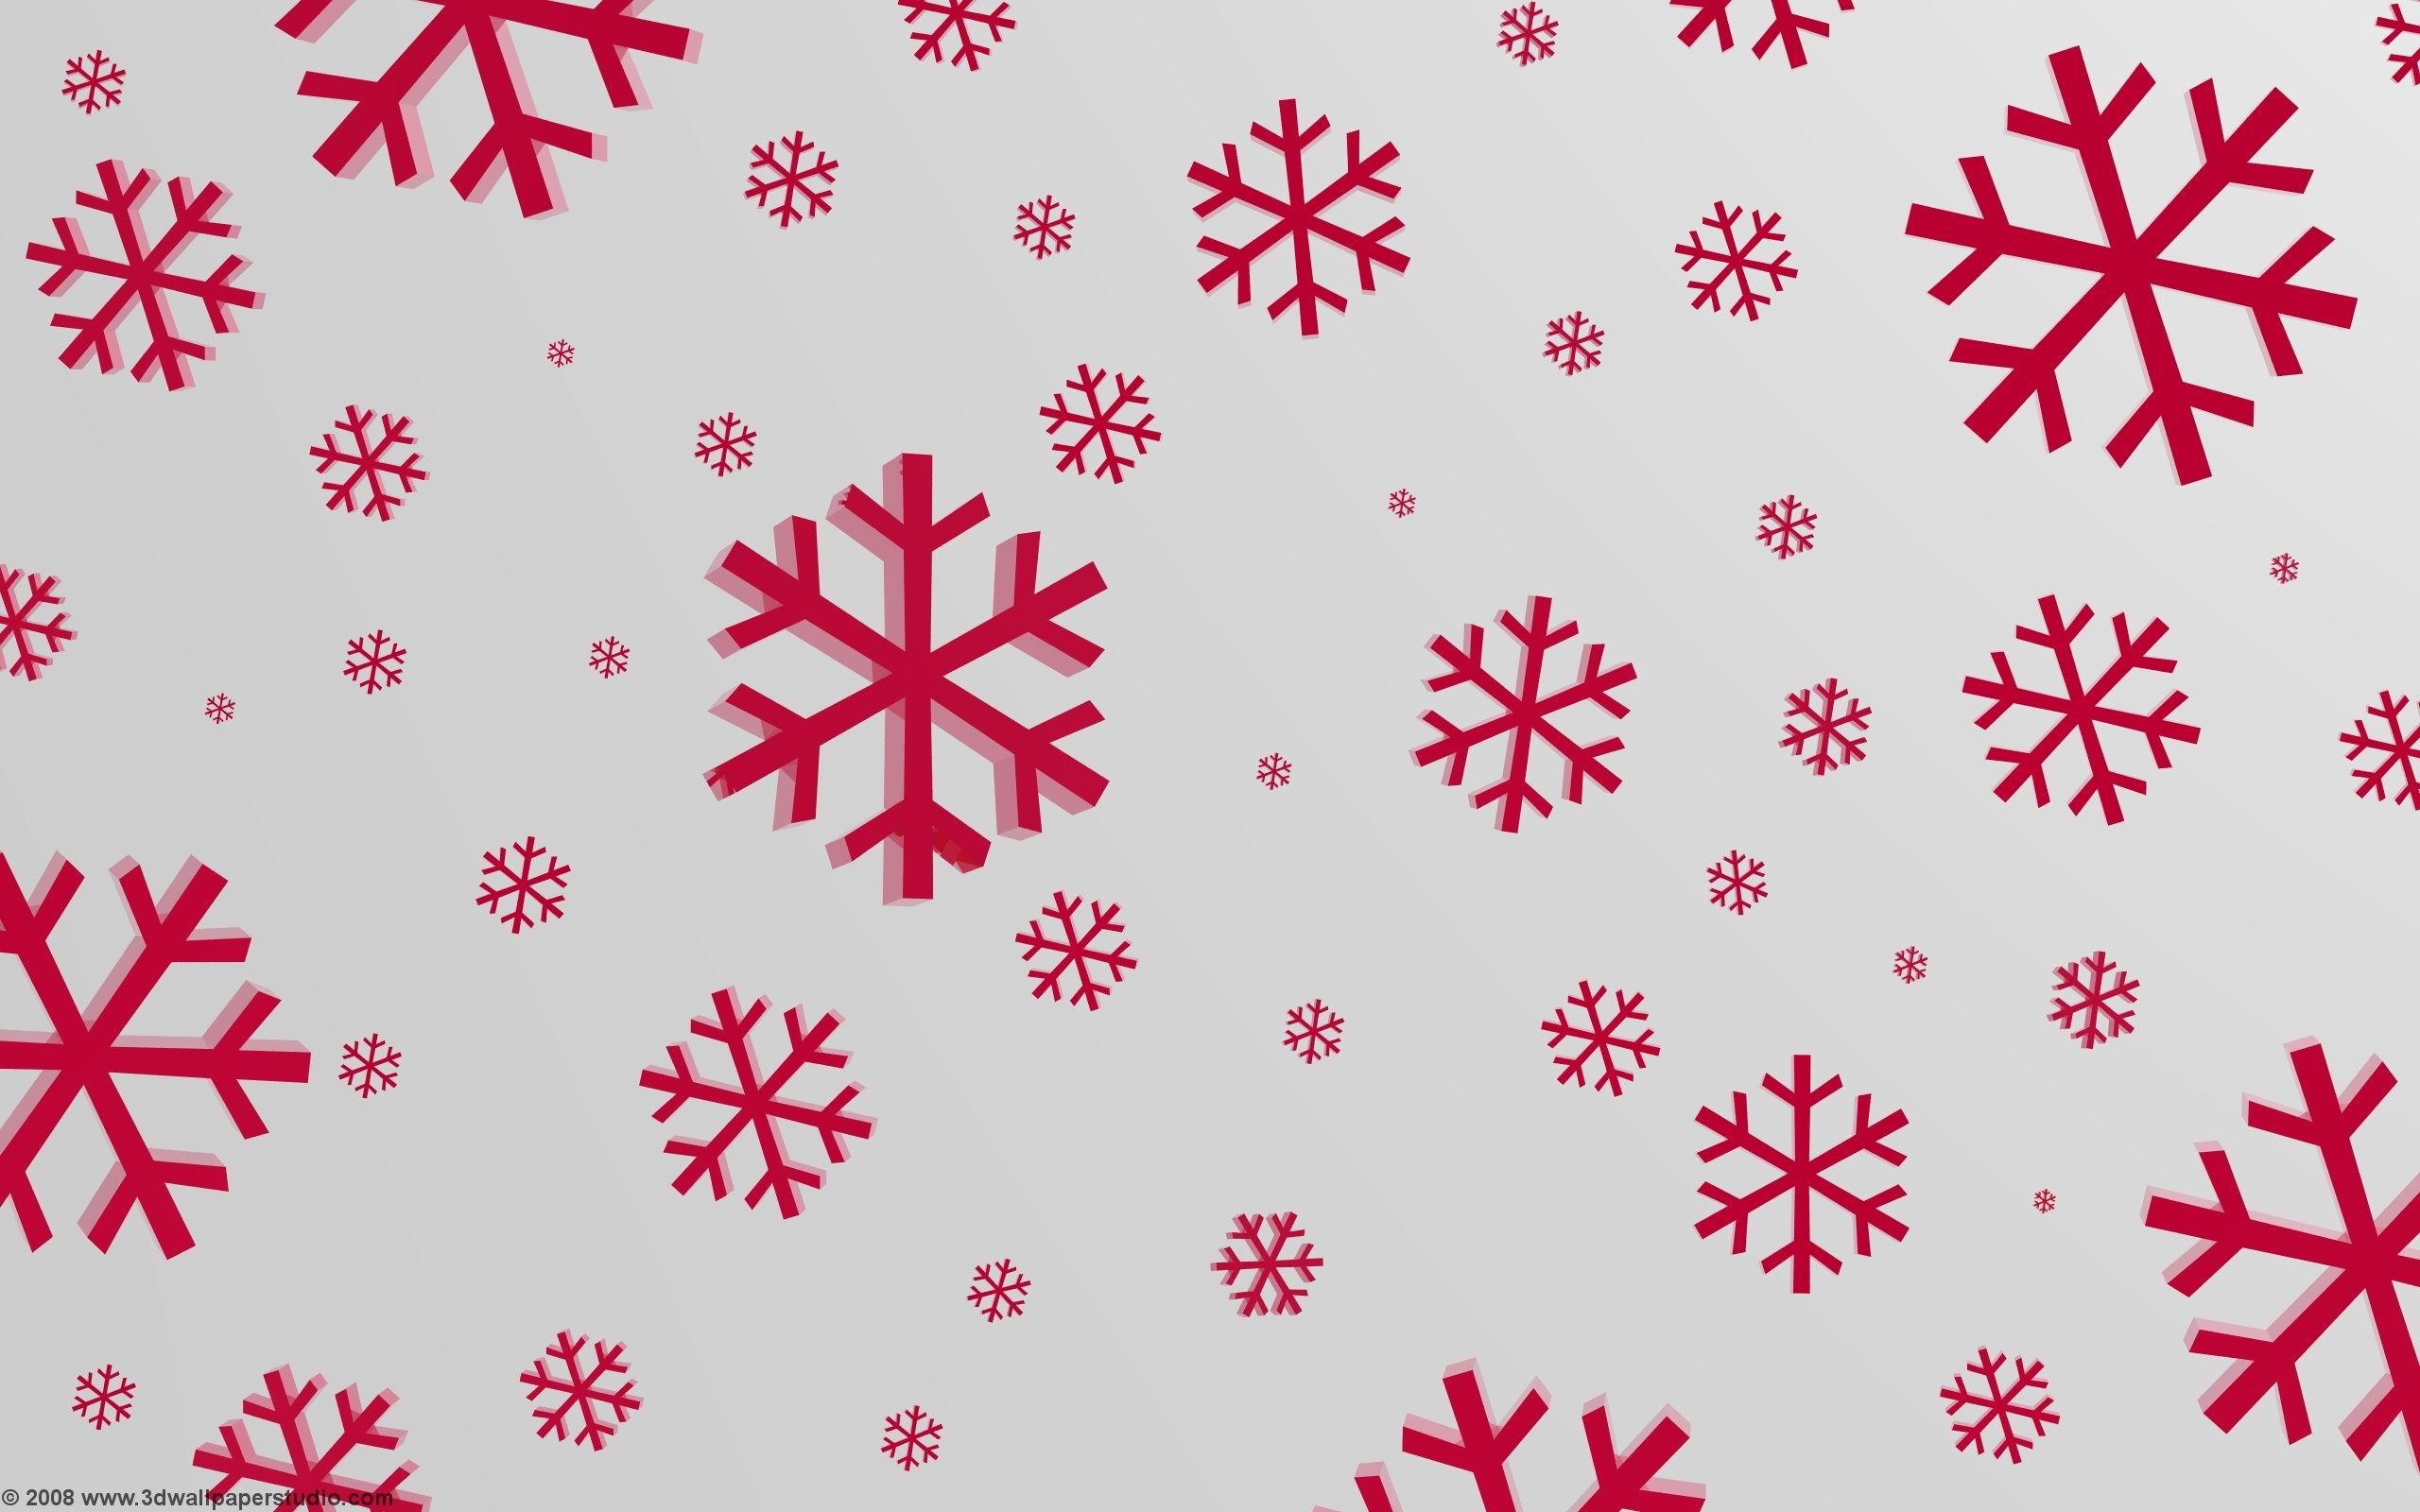 Snowflakes wallpaper, red, white, gray, Christmas, 1920x1200, picture, image - Snowflake